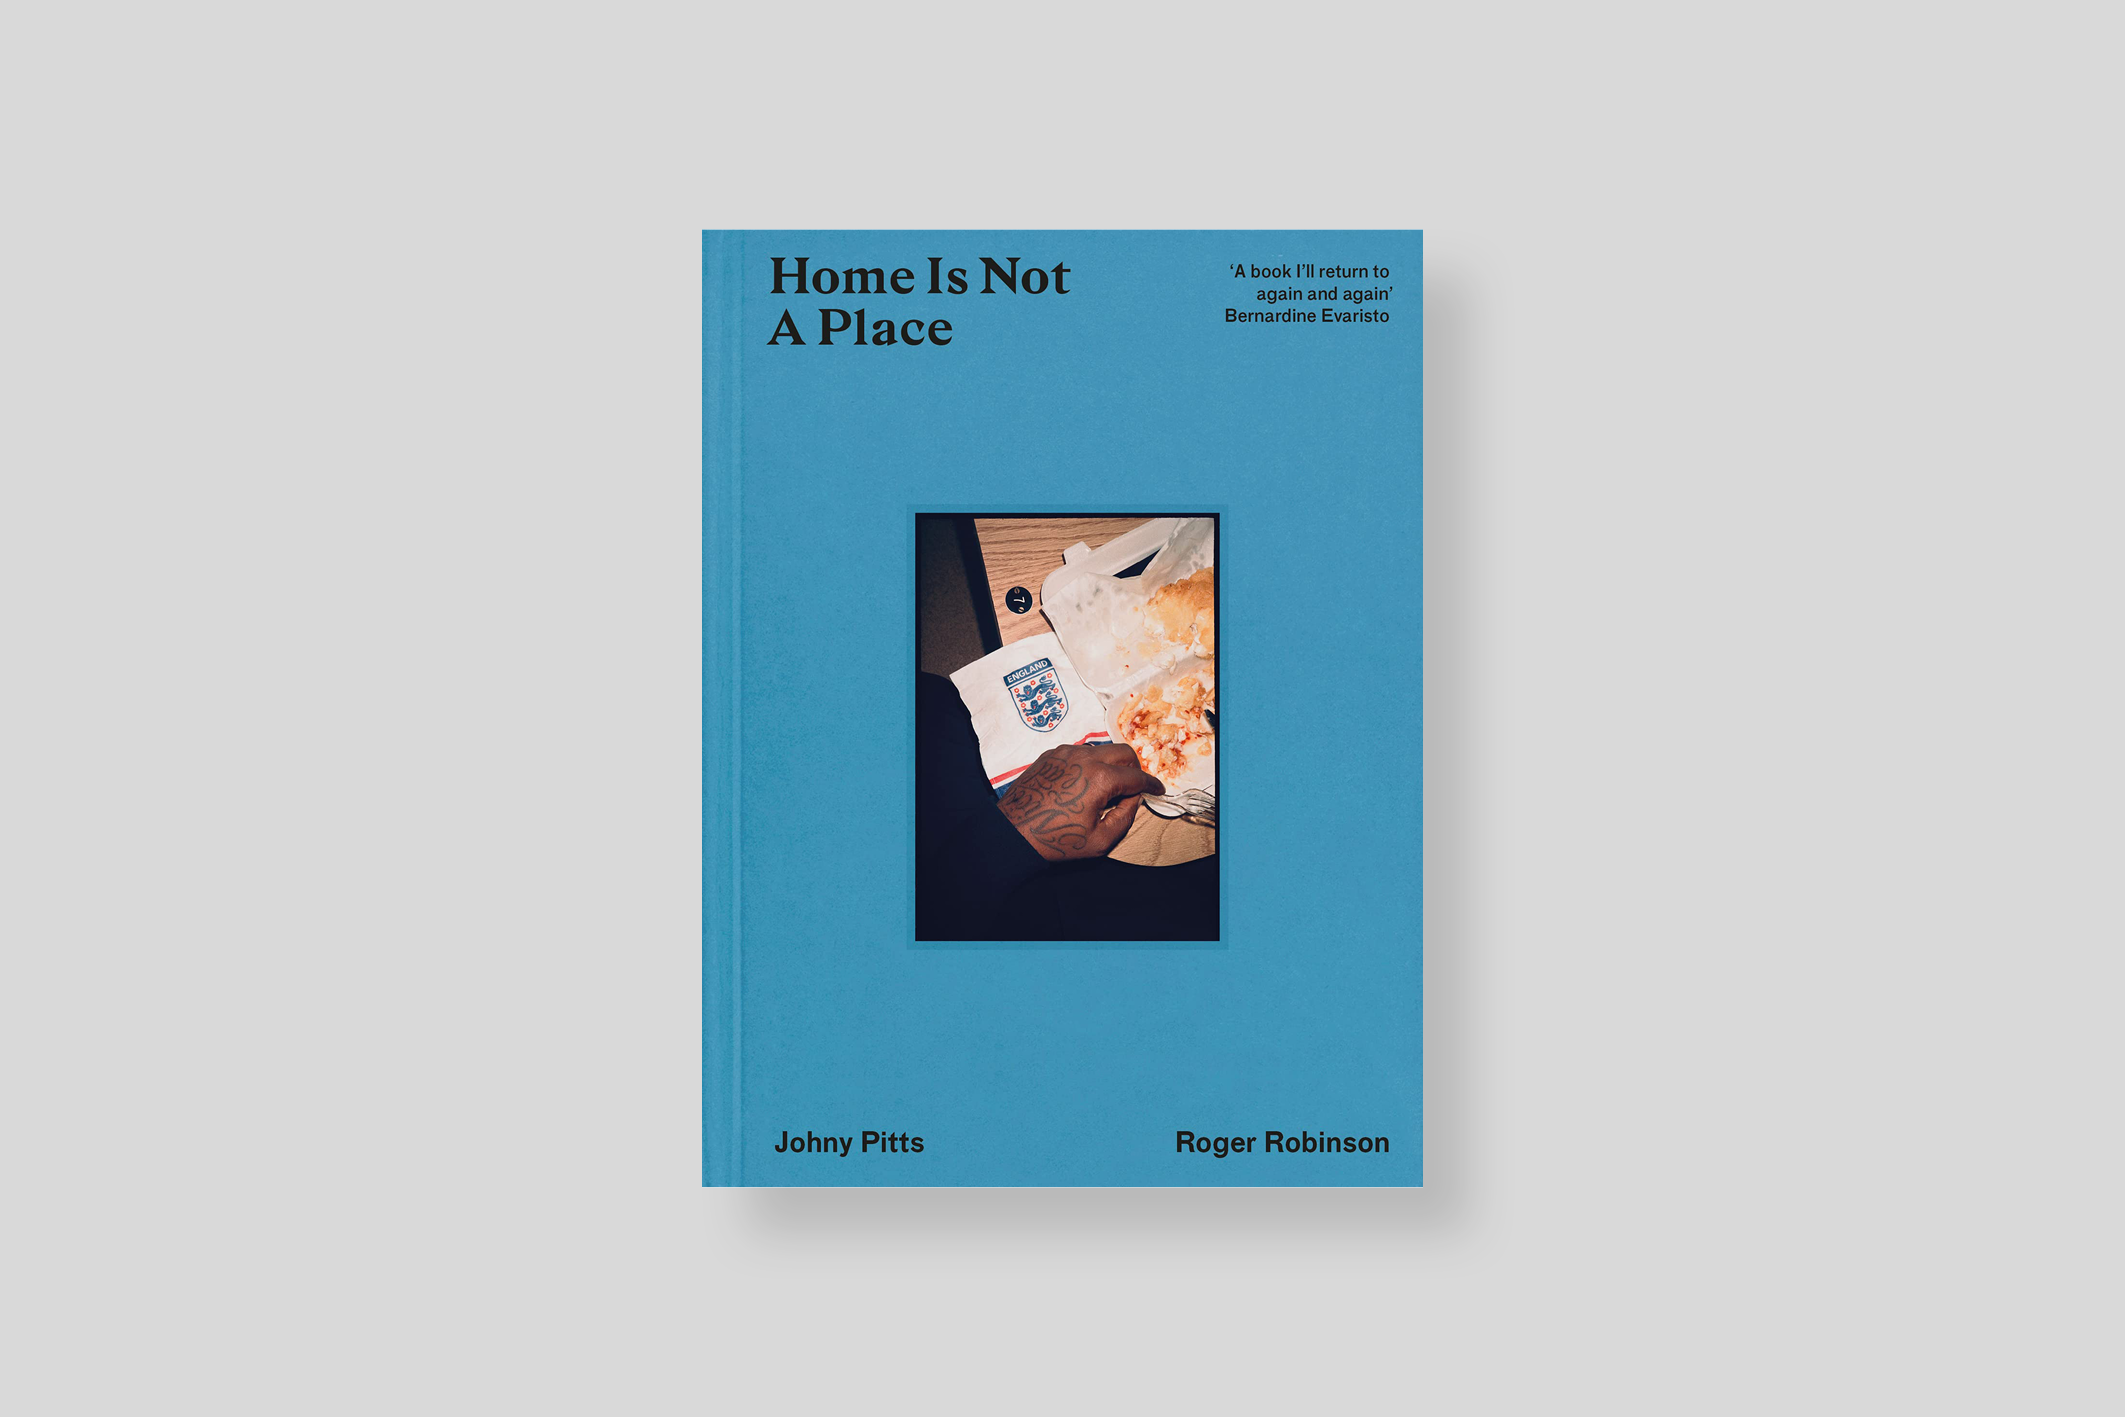 home-is-not-a-place-pitts-robinson-harper-collins-cover